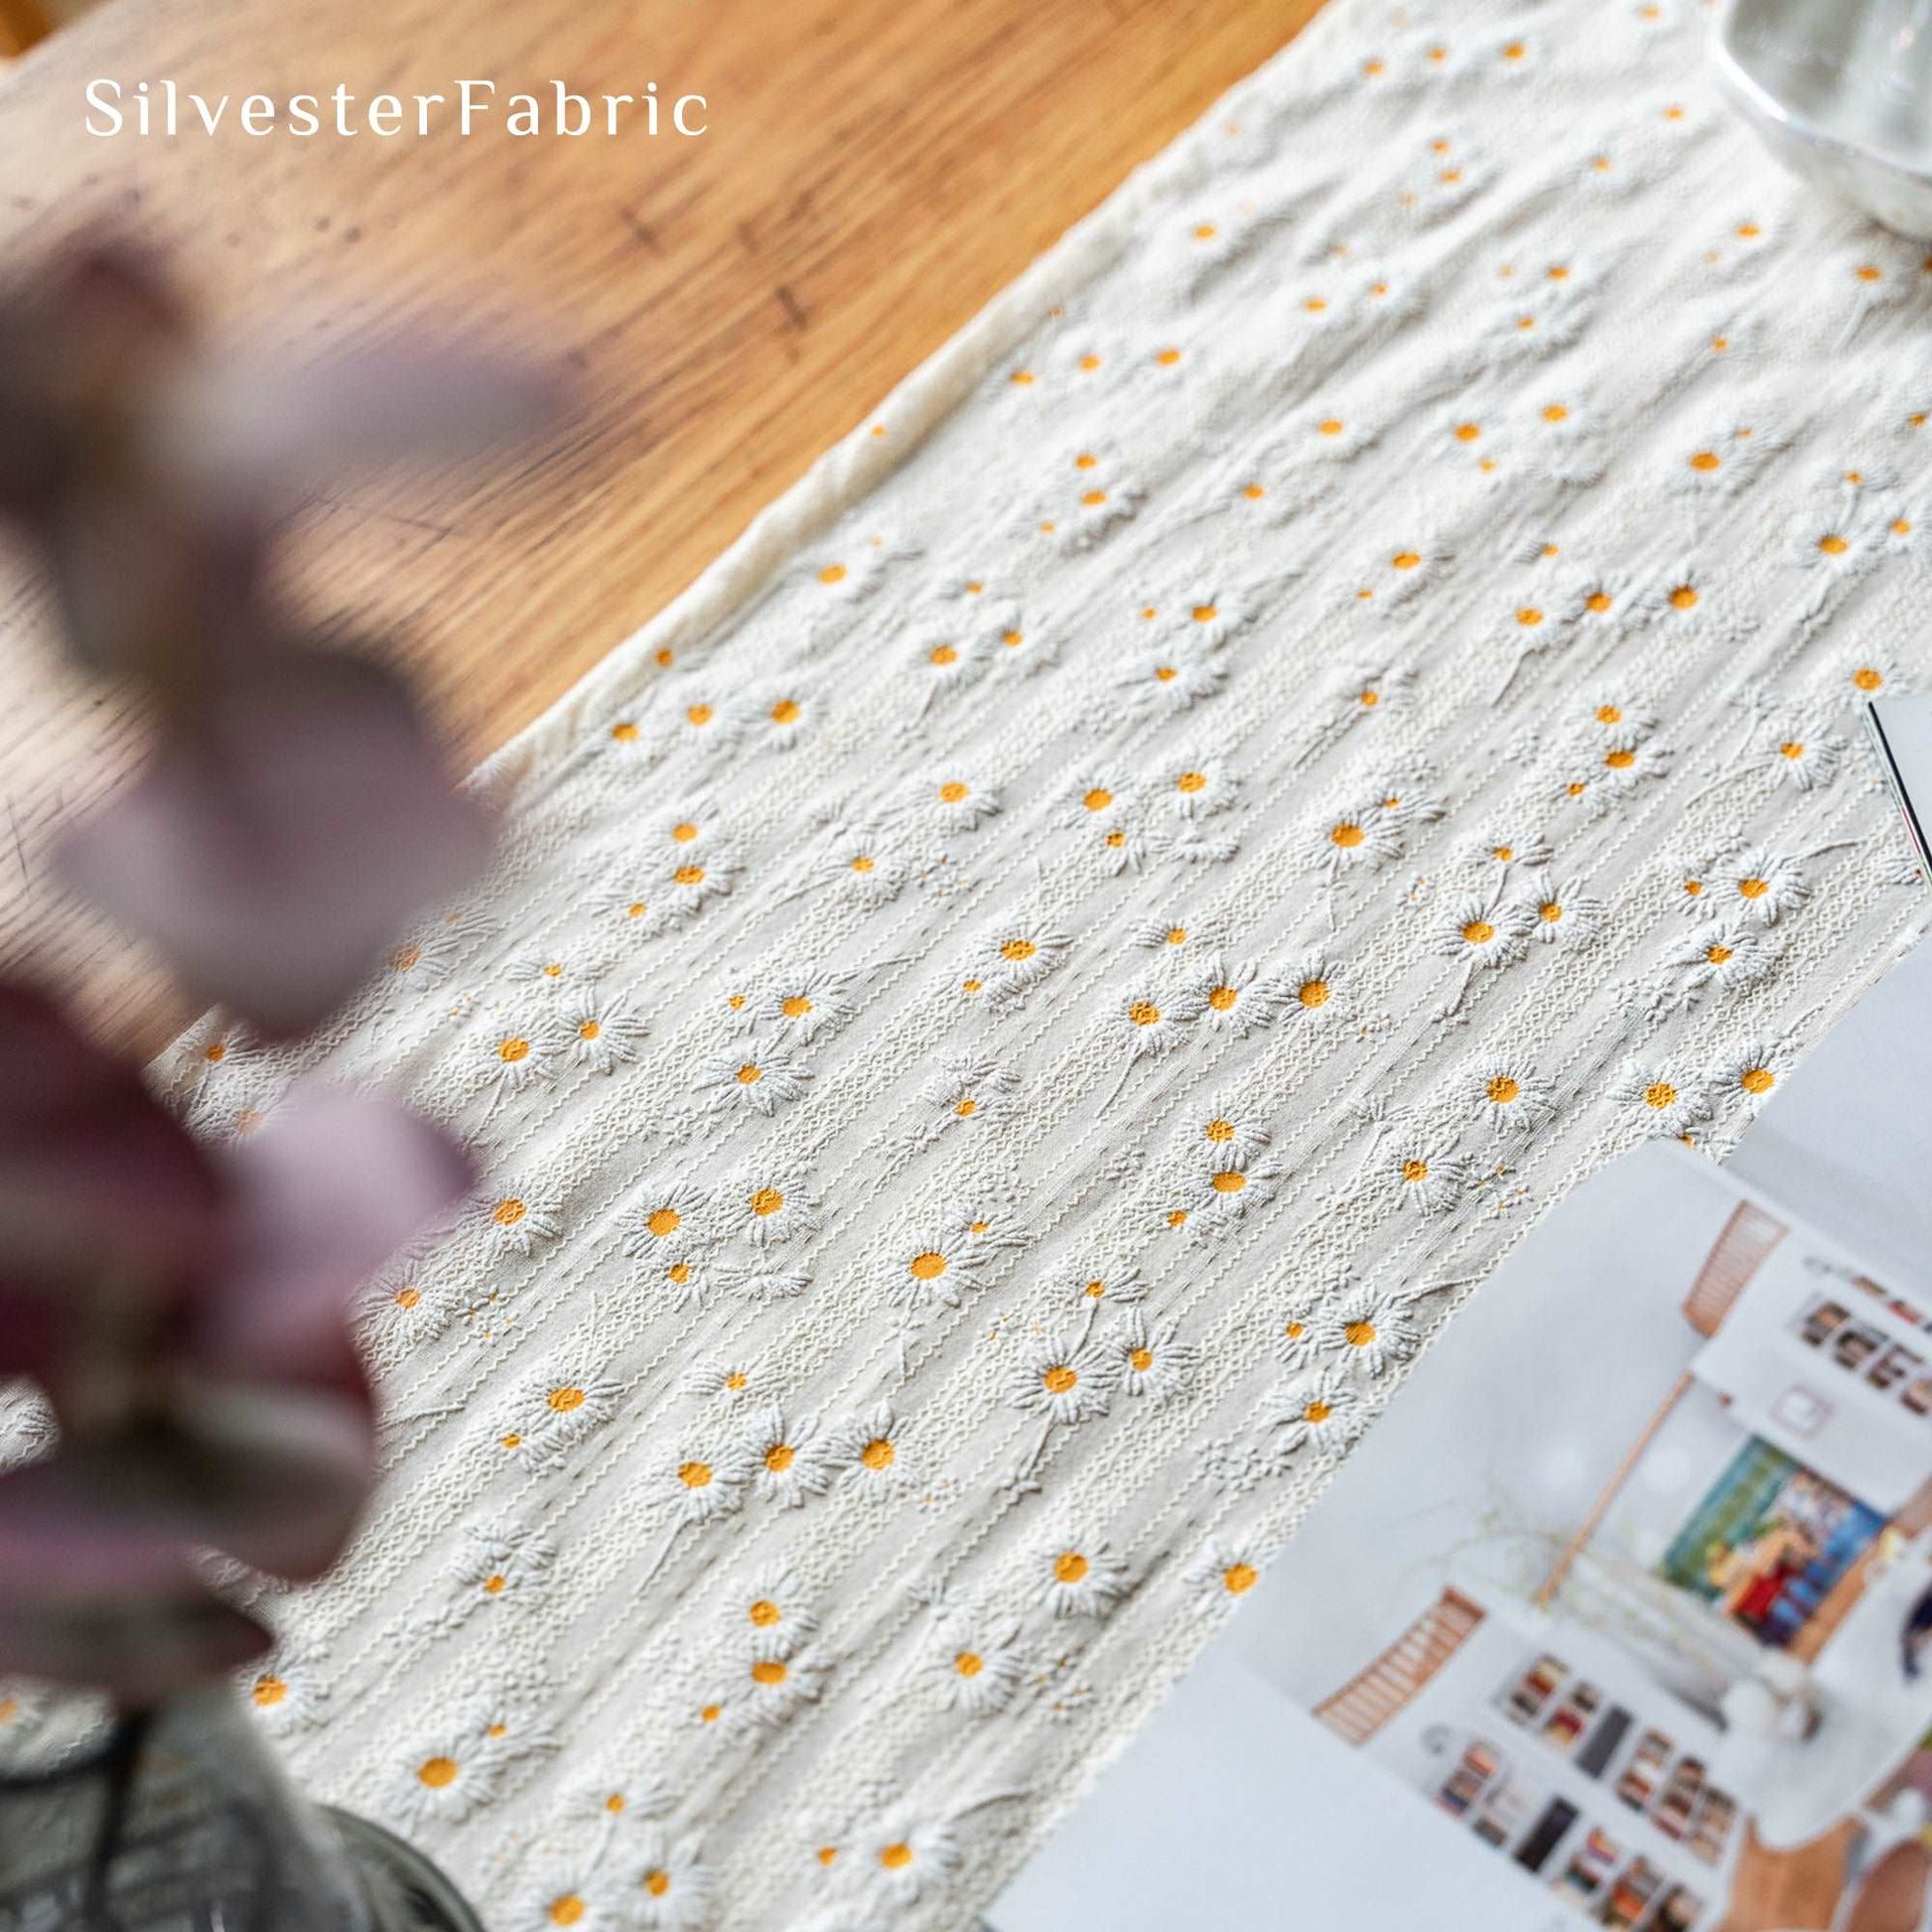 Yellow Daisy Printed French Country Vintage Cotton Long Table Runners